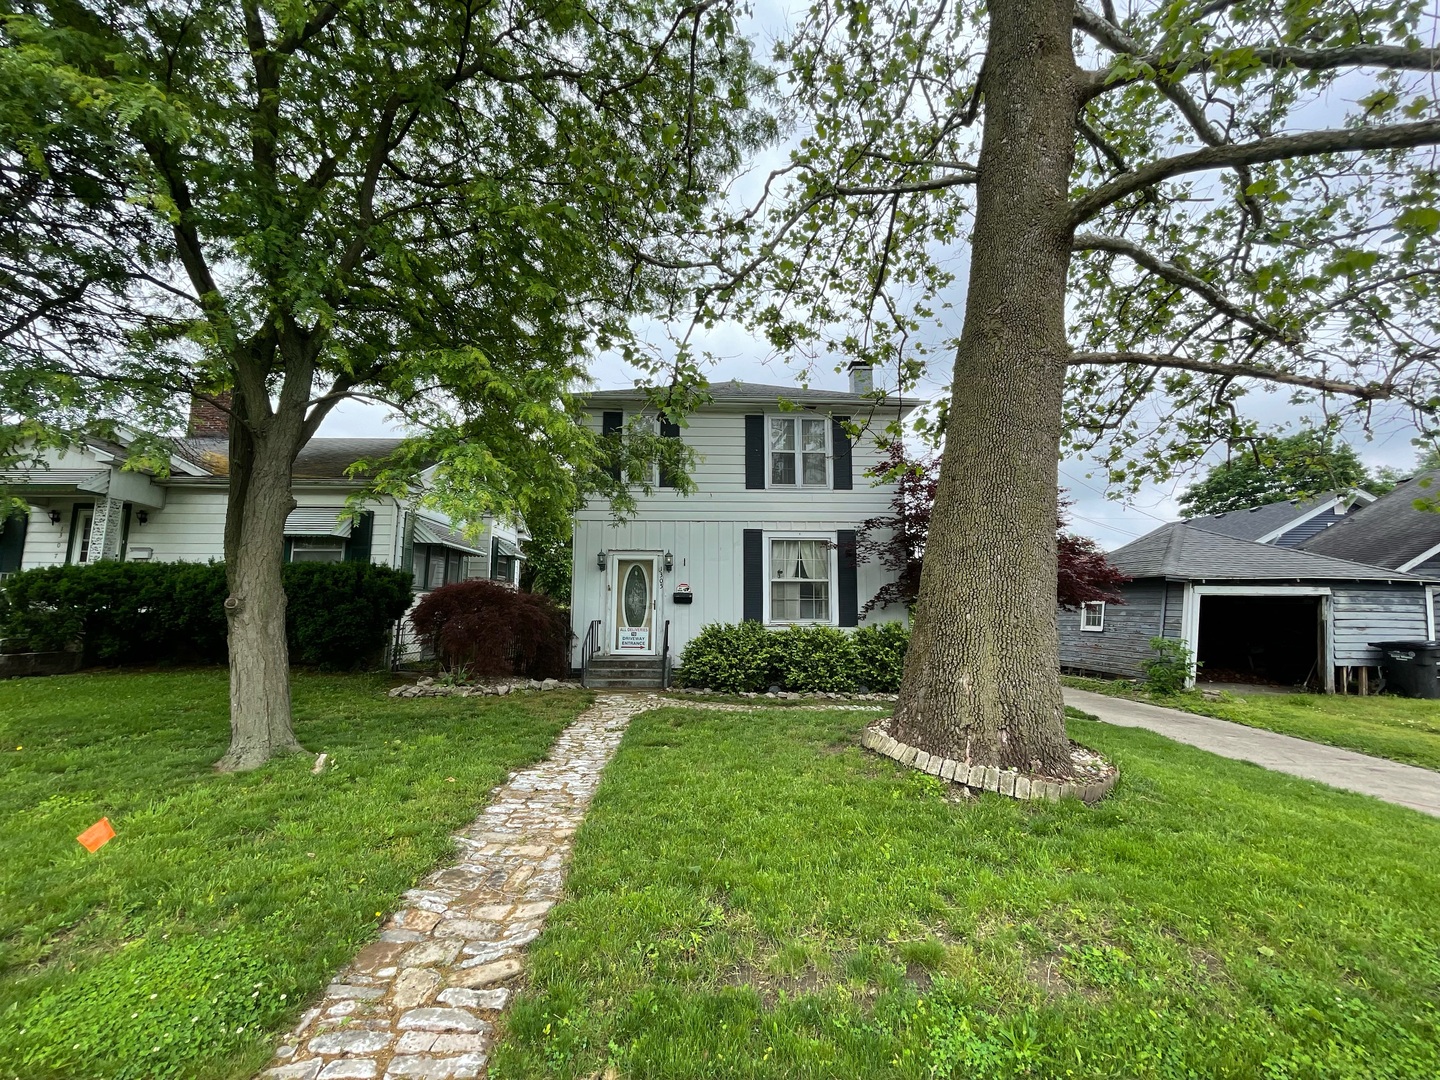 a view of a house with a yard and a large tree